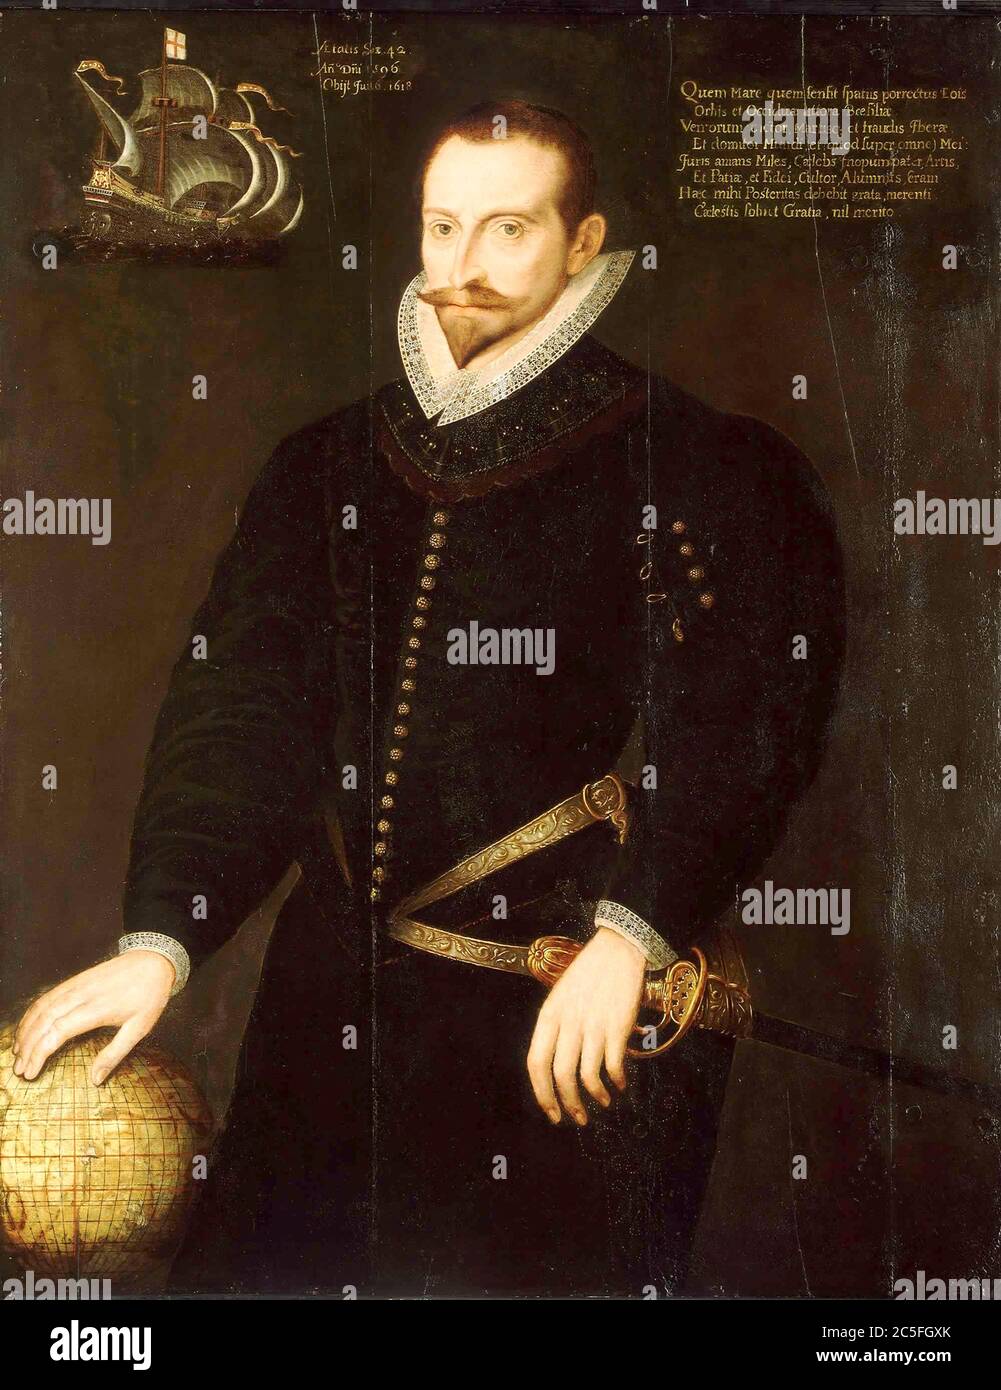 James Lancaster commanded the first East India Company voyage in 1601. Sir James Lancaster VI (1554 – 1618) prominent Elizabethan trader and privateer. Stock Photo